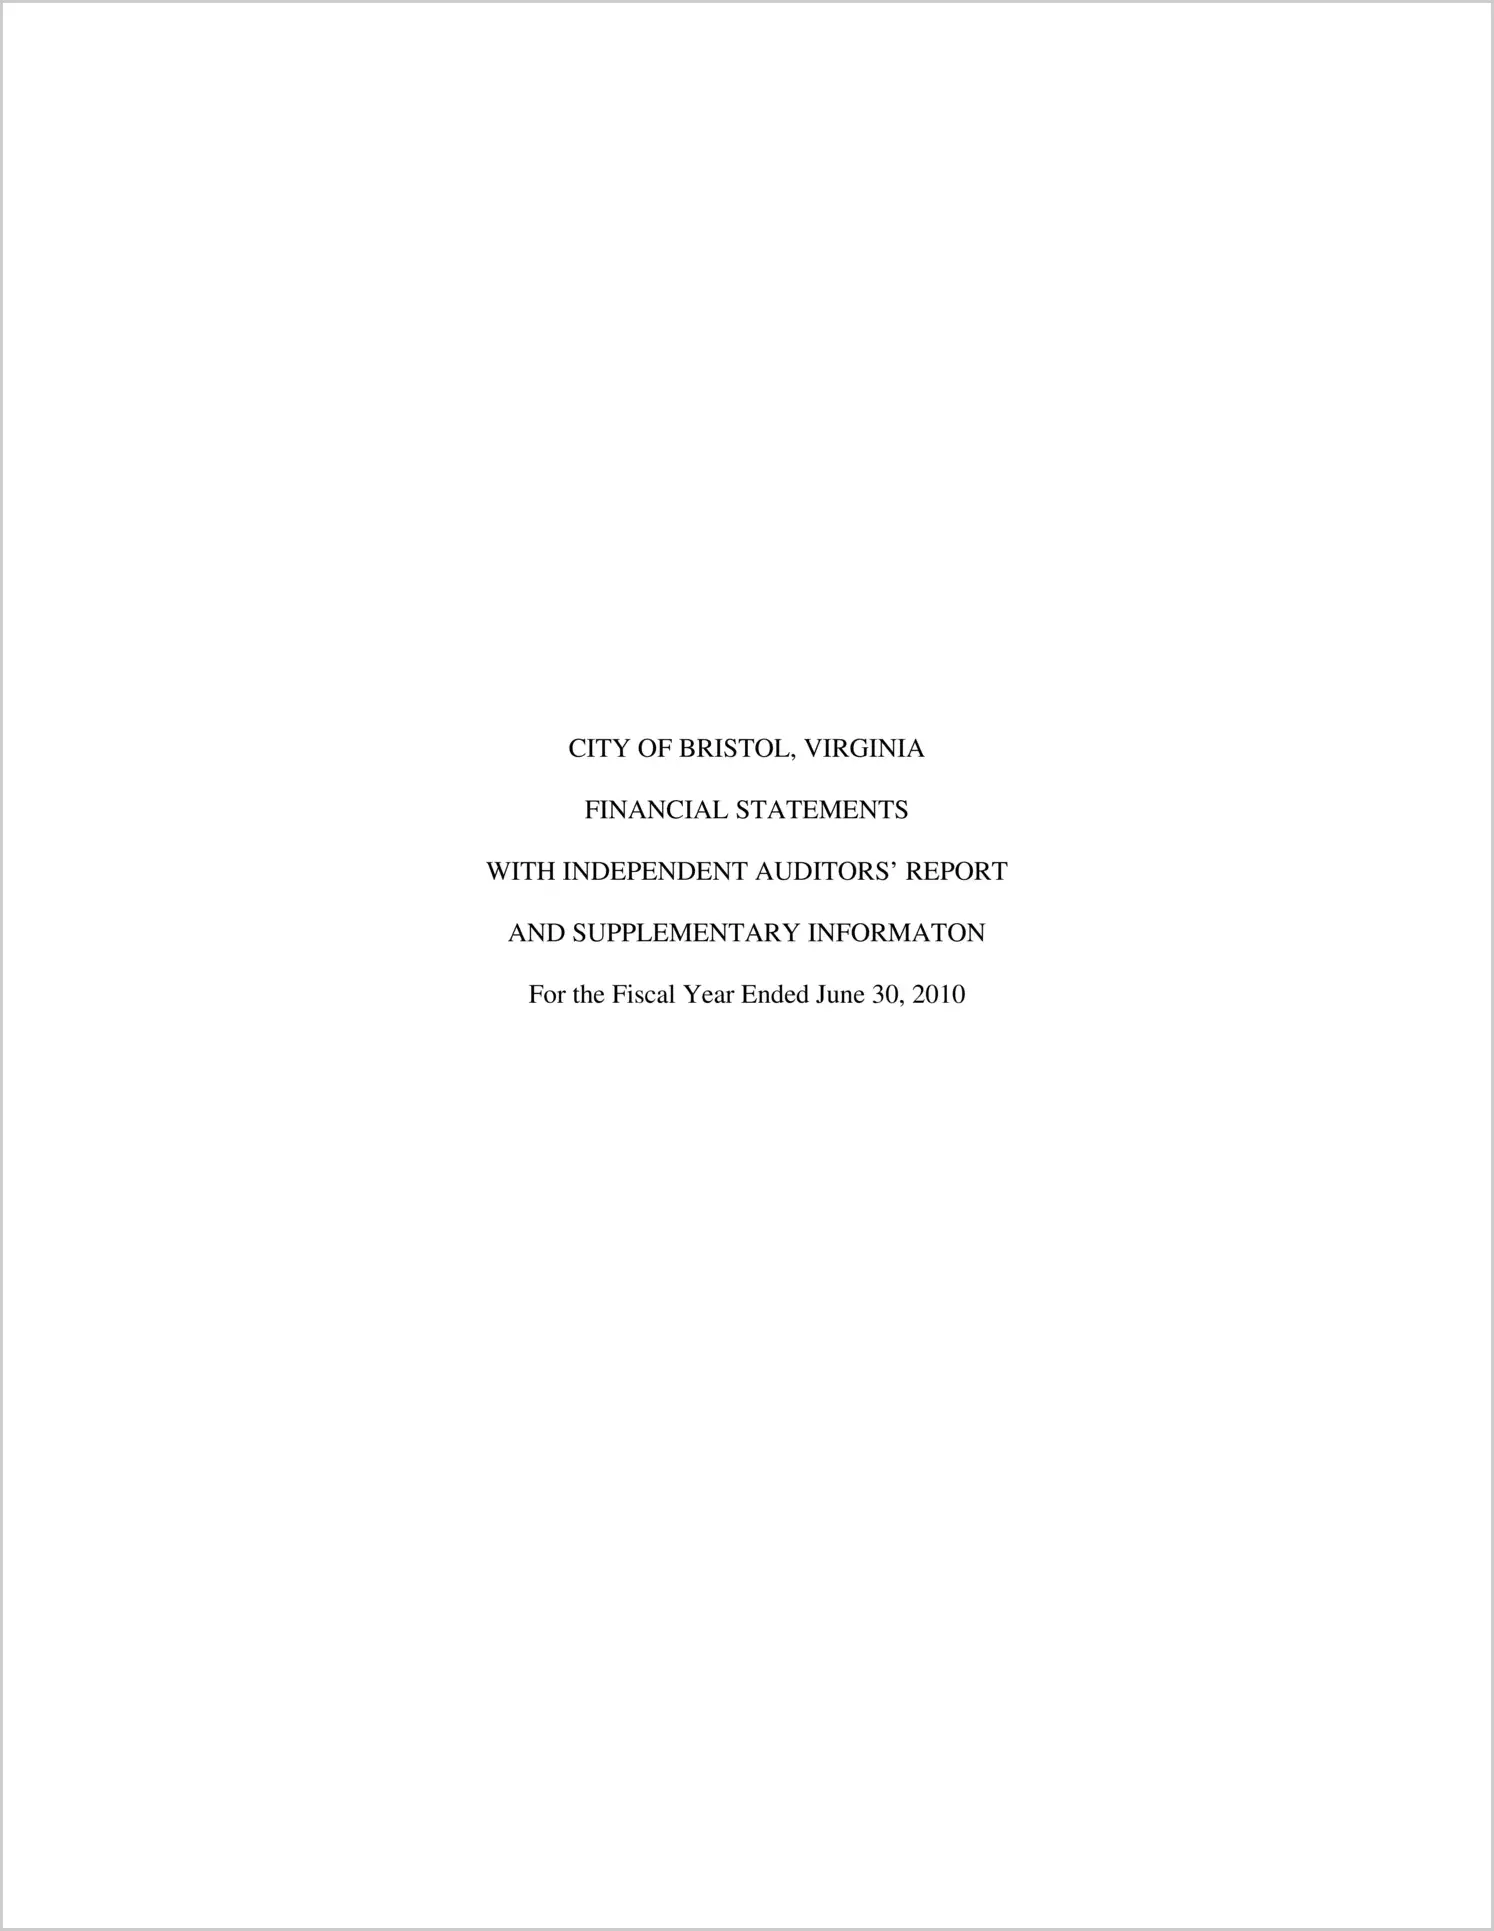 2010 Annual Financial Report for City of Bristol